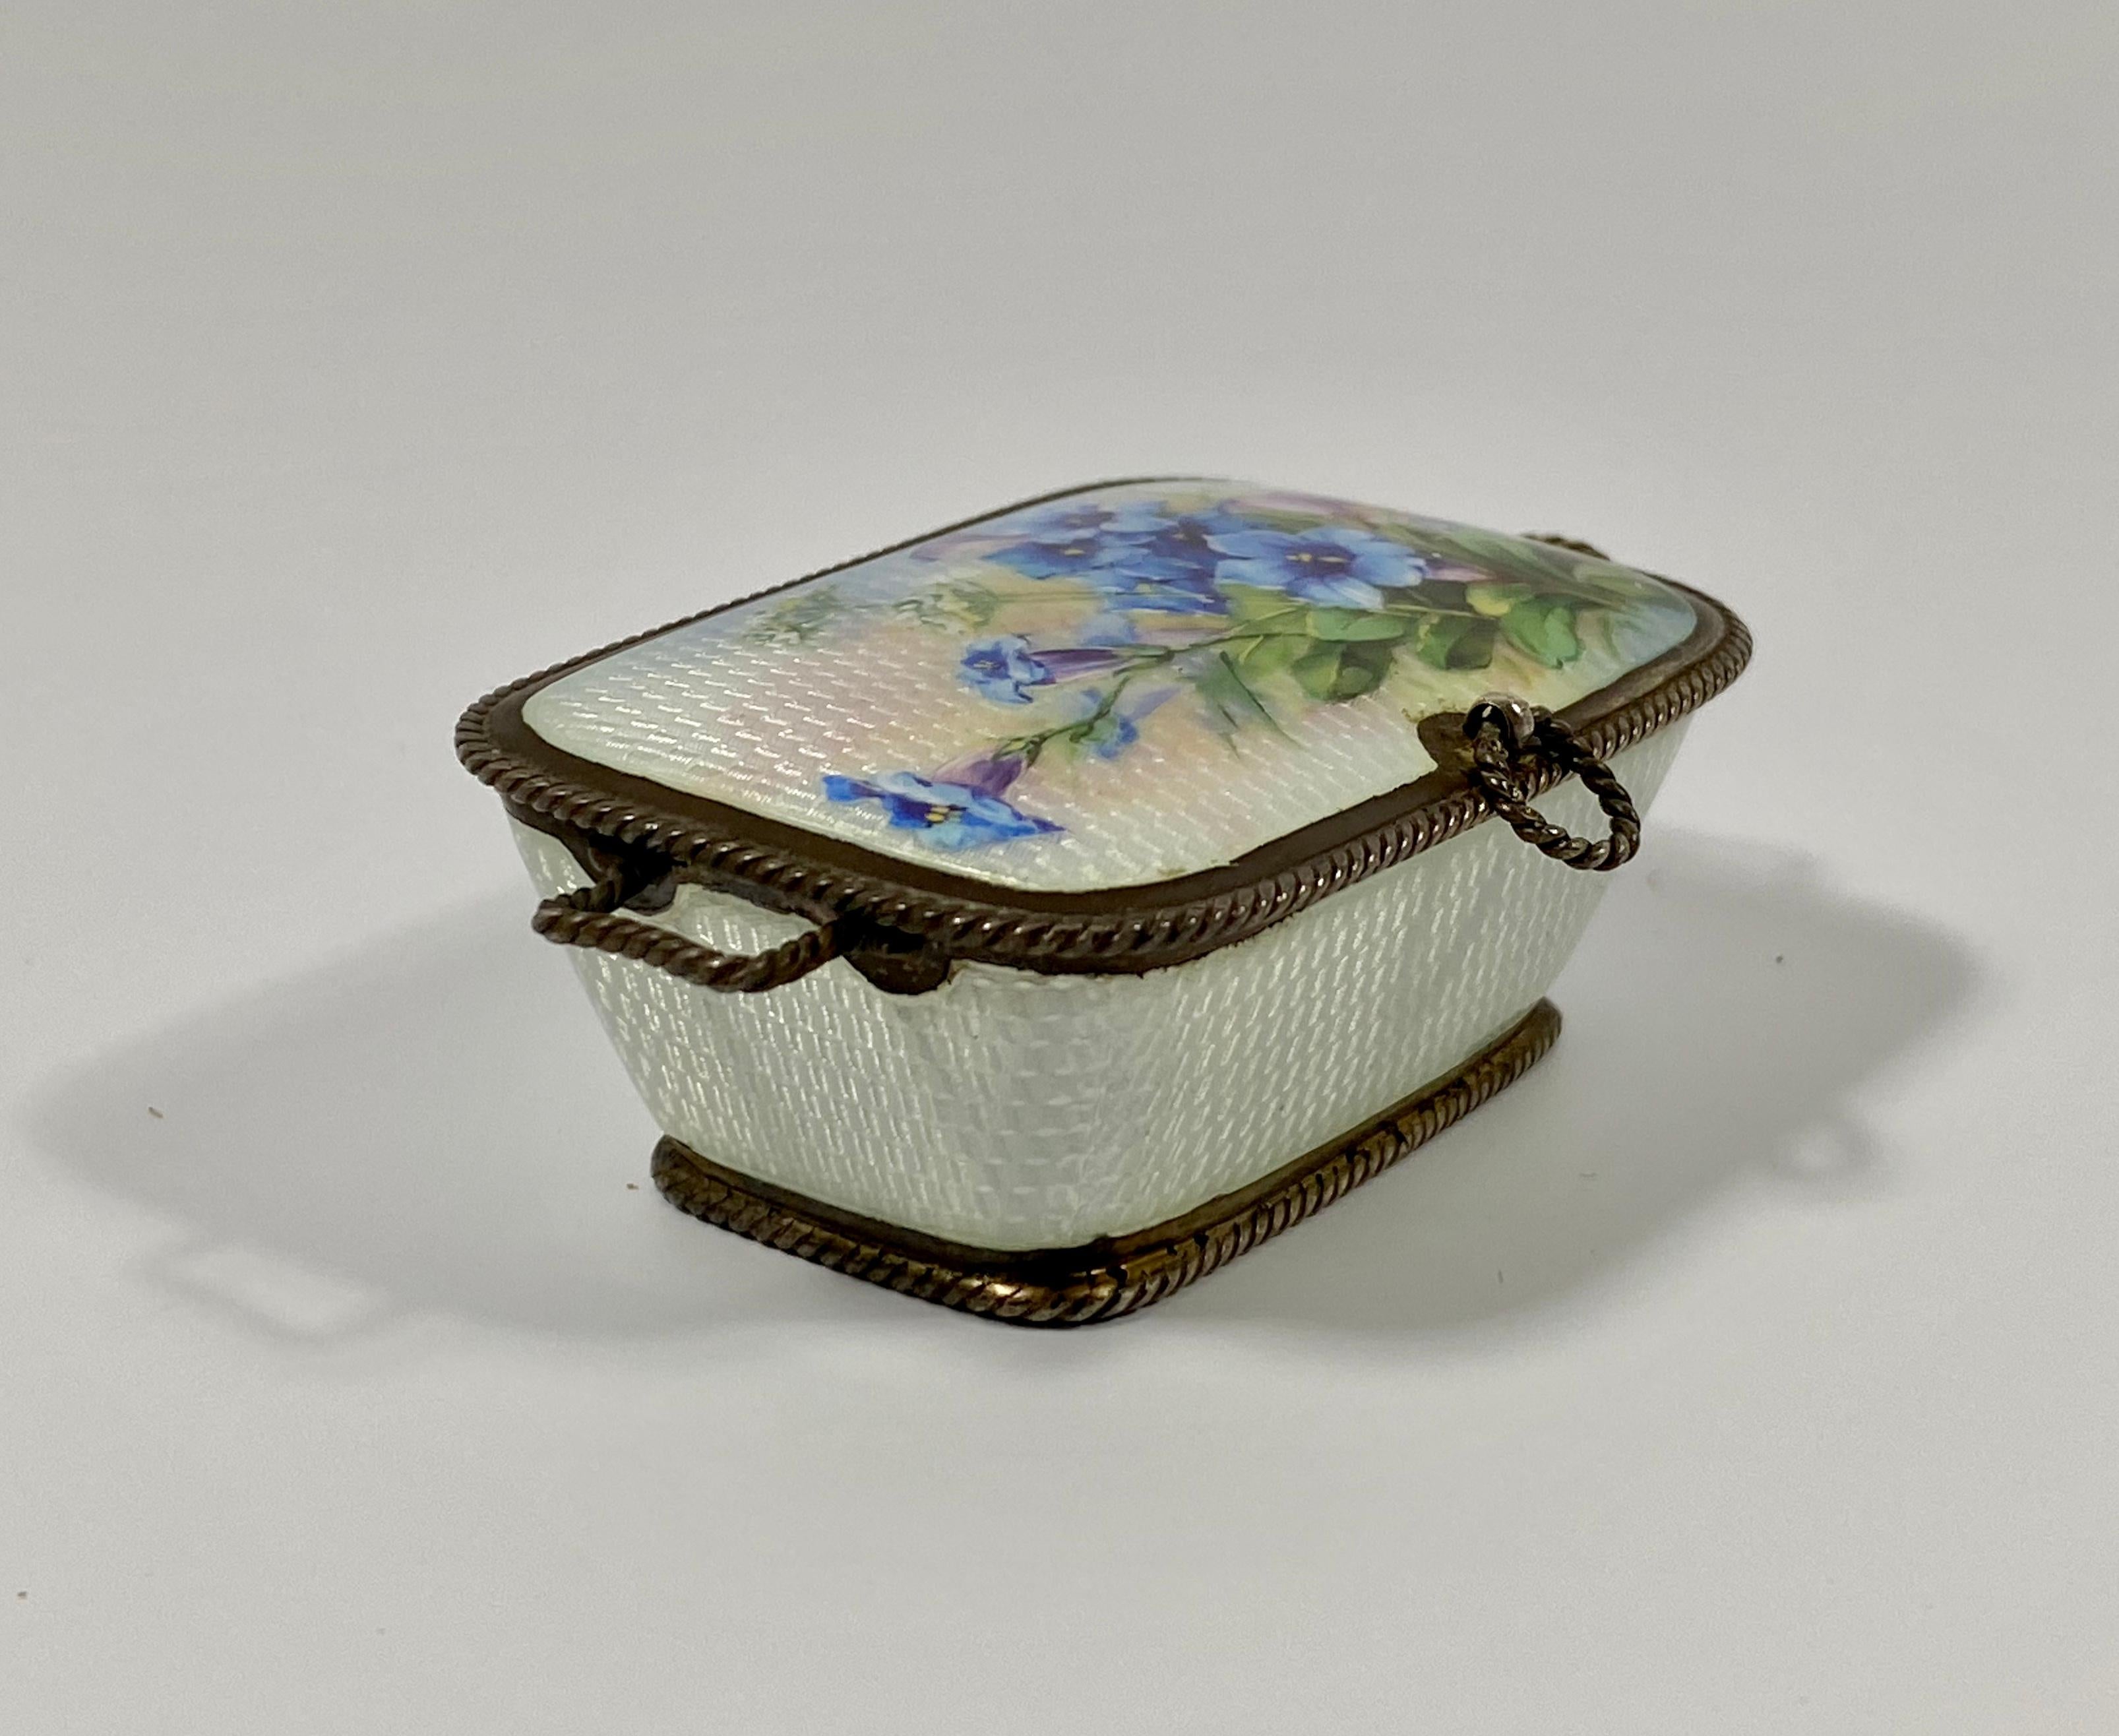 Edwardian Silver and Enamel Box, Dated 1911, Import Marks for Cohen & Charles